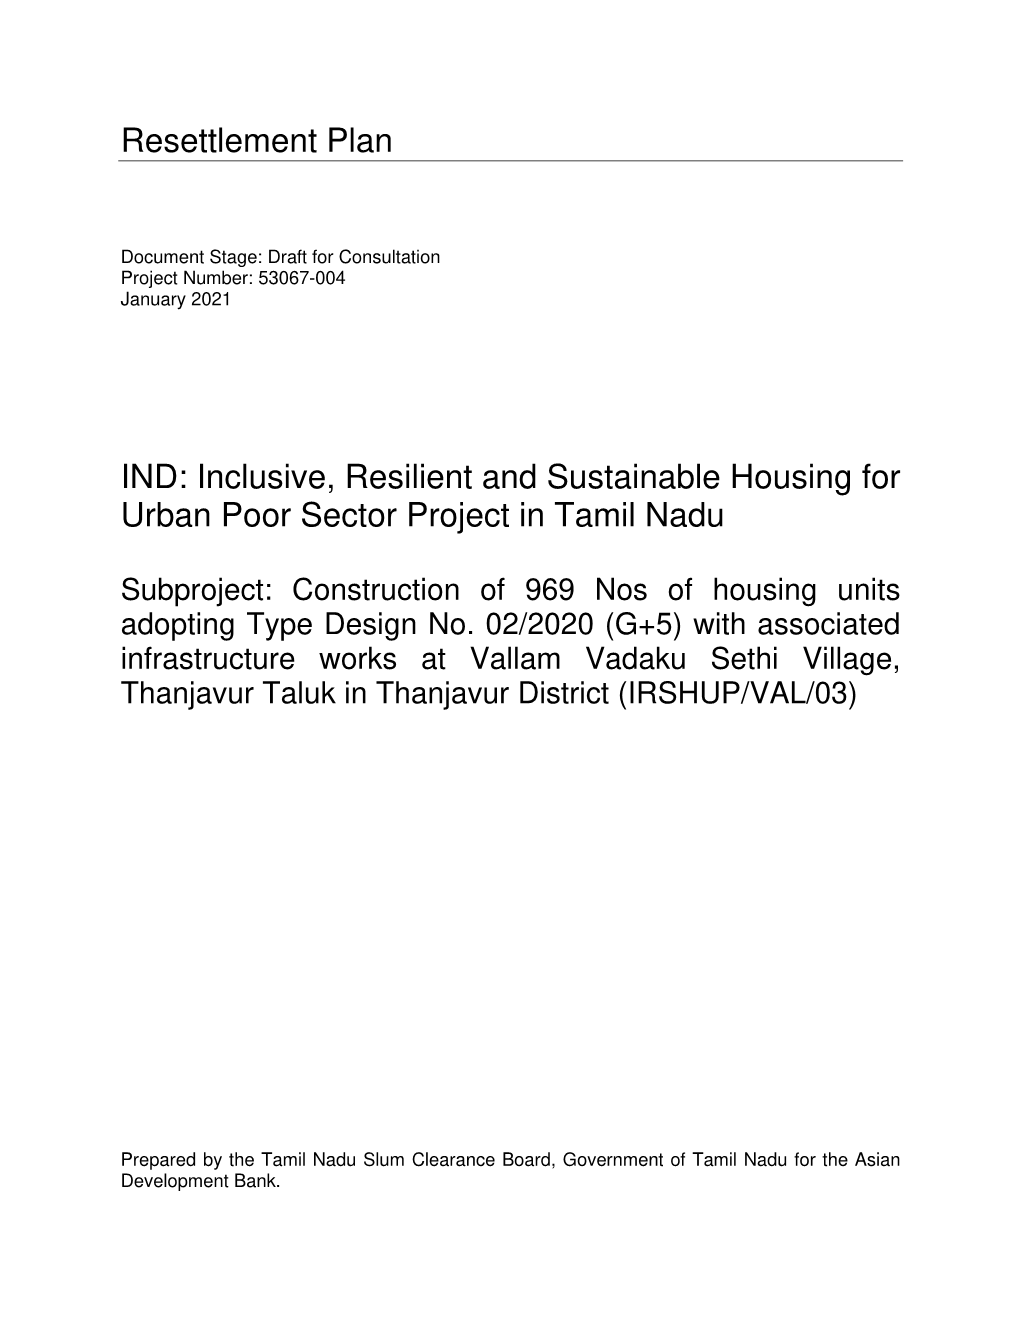 53067-004: Inclusive, Resilient, and Sustainable Housing for Urban